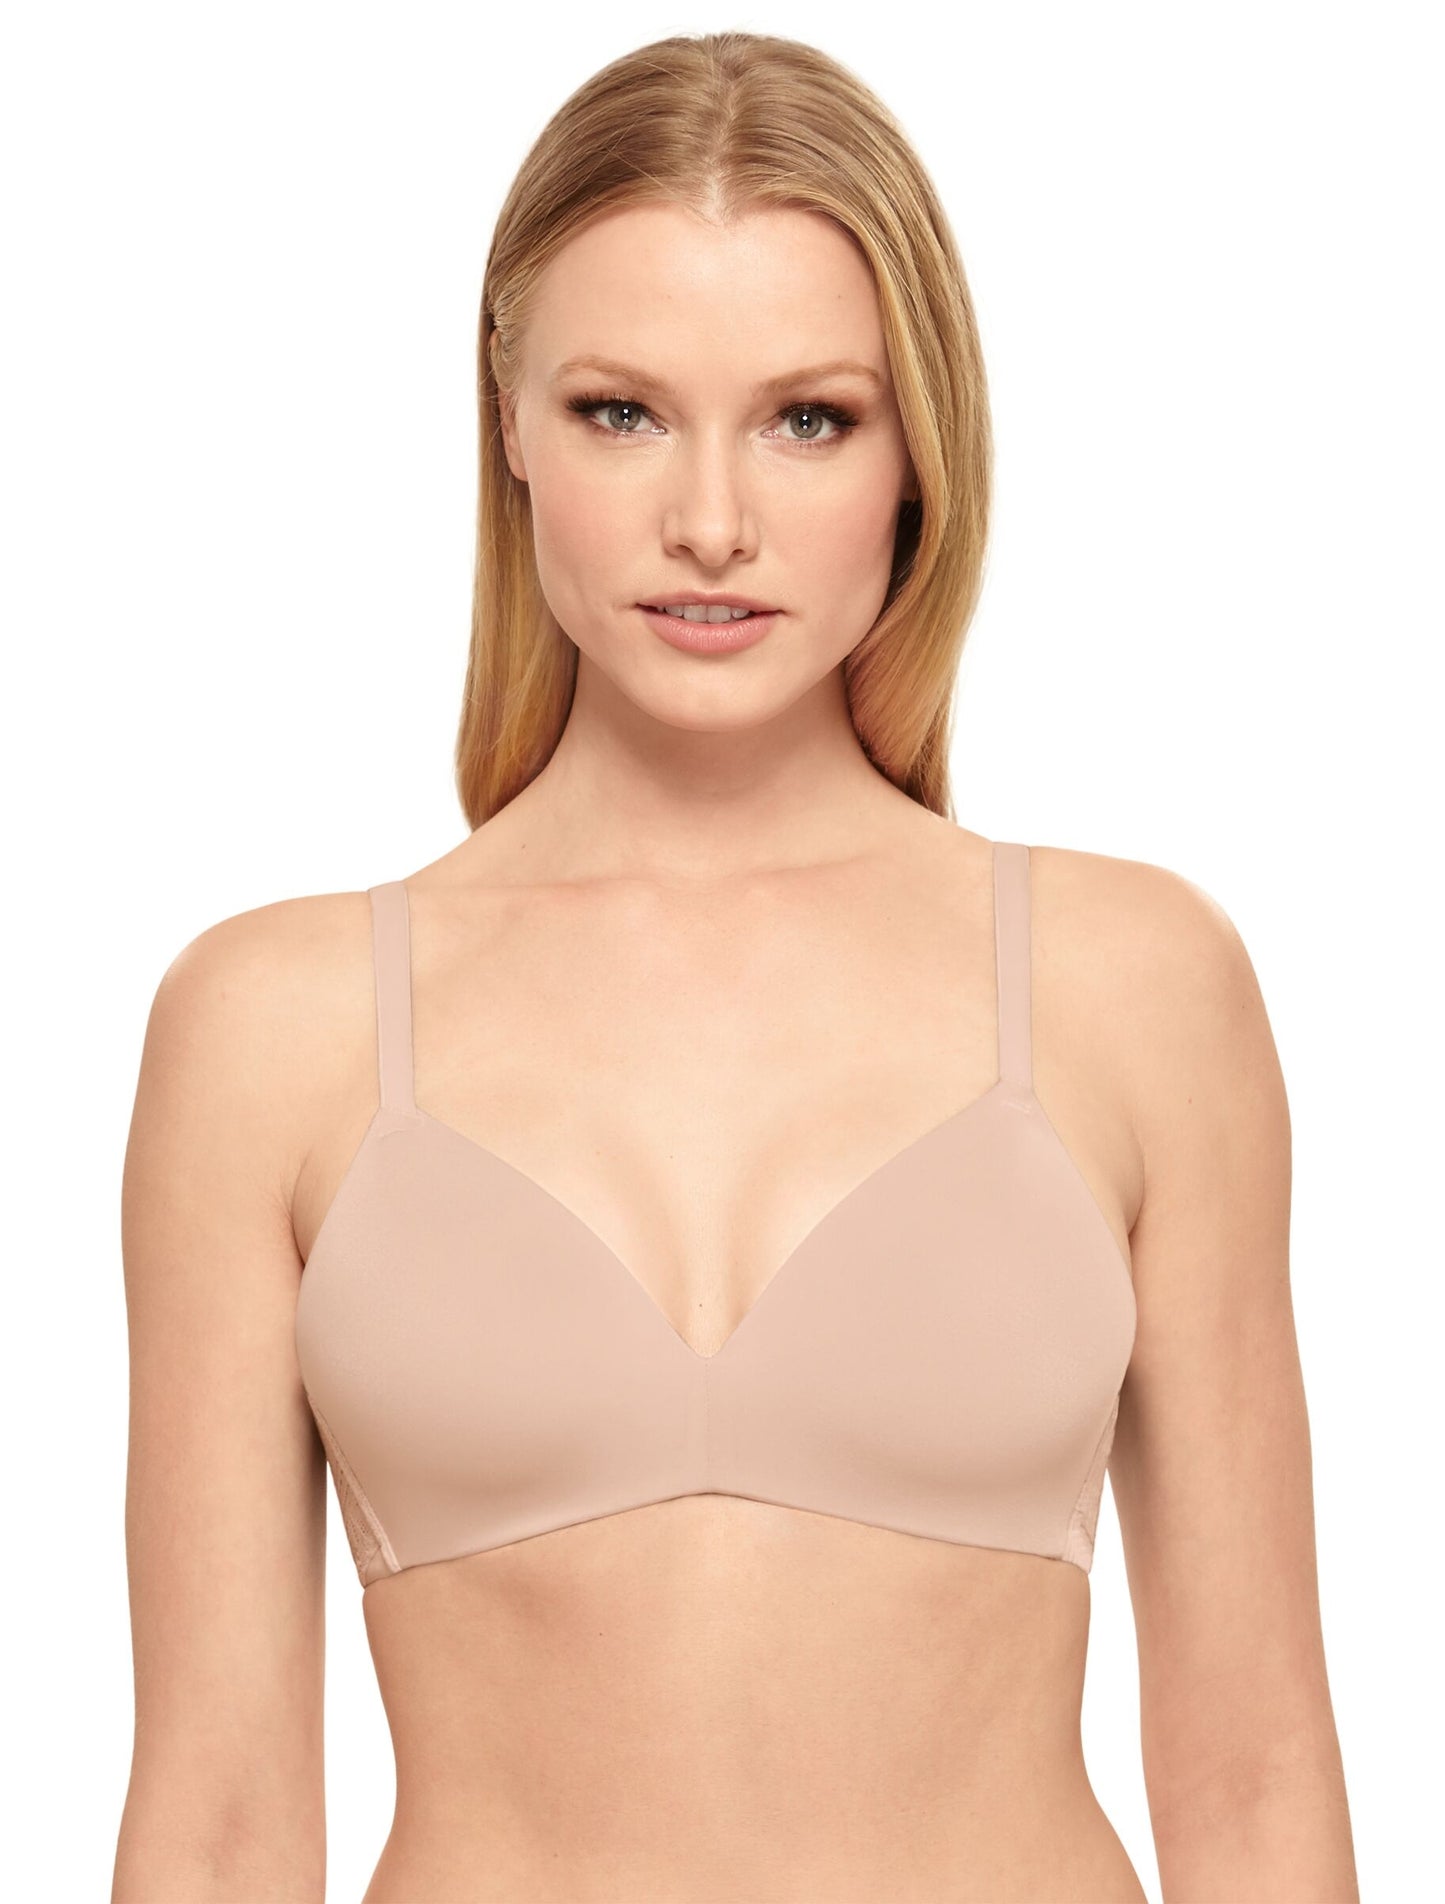 future foundations 952253 nonwired bra in light nude light blush bra smooth cup